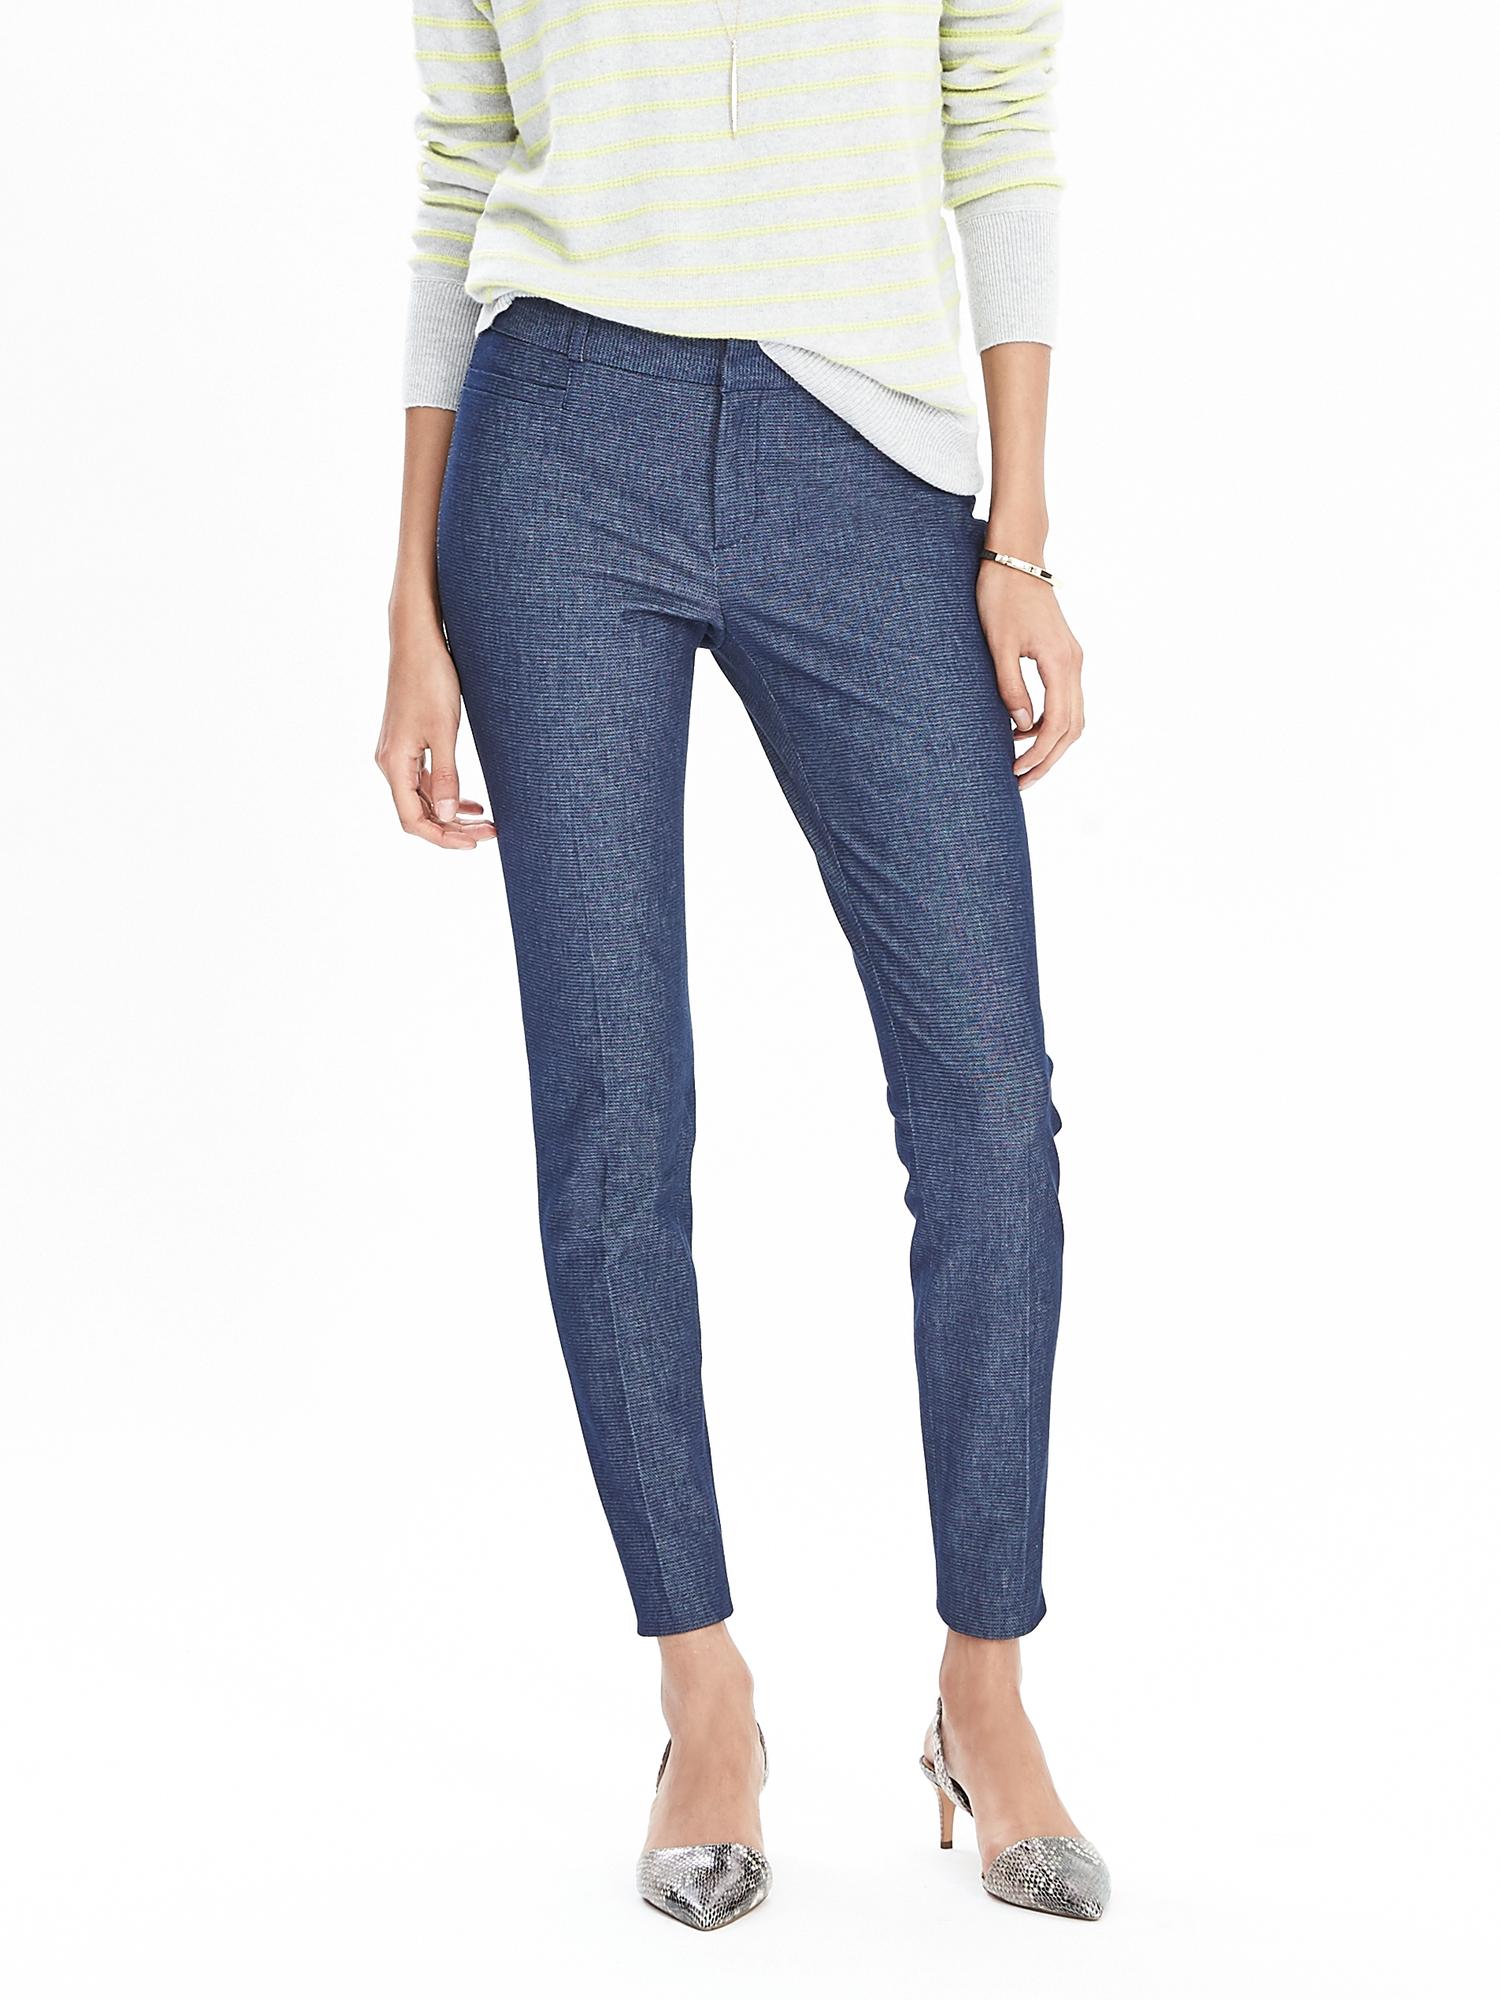 New Sloan-Fit Chambray Slim Ankle Pant